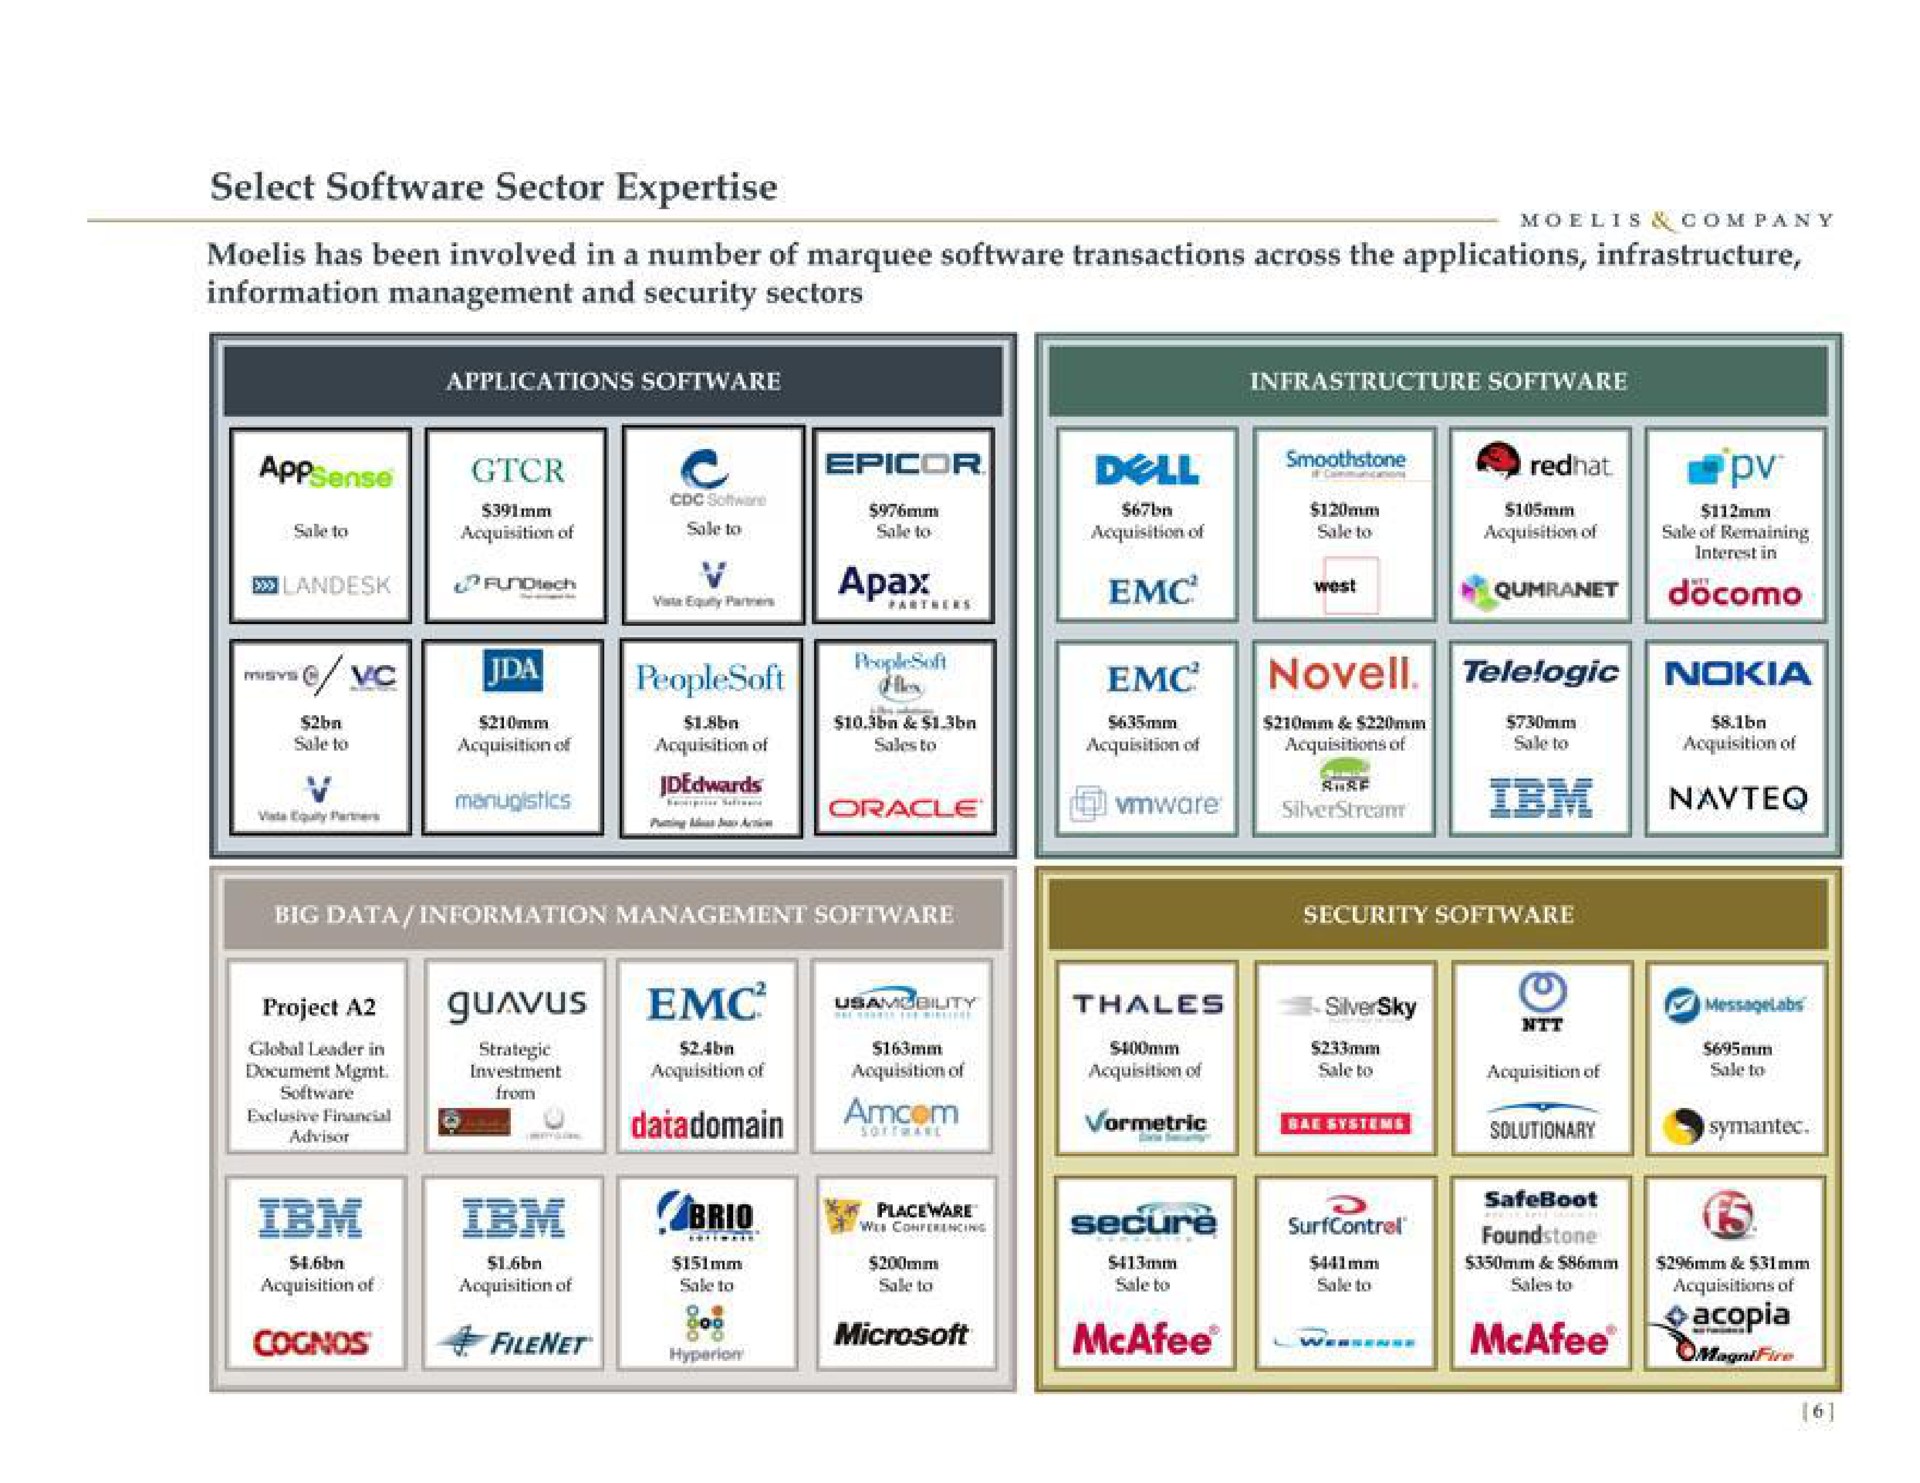 select sector information management and security sectors | Moelis & Company